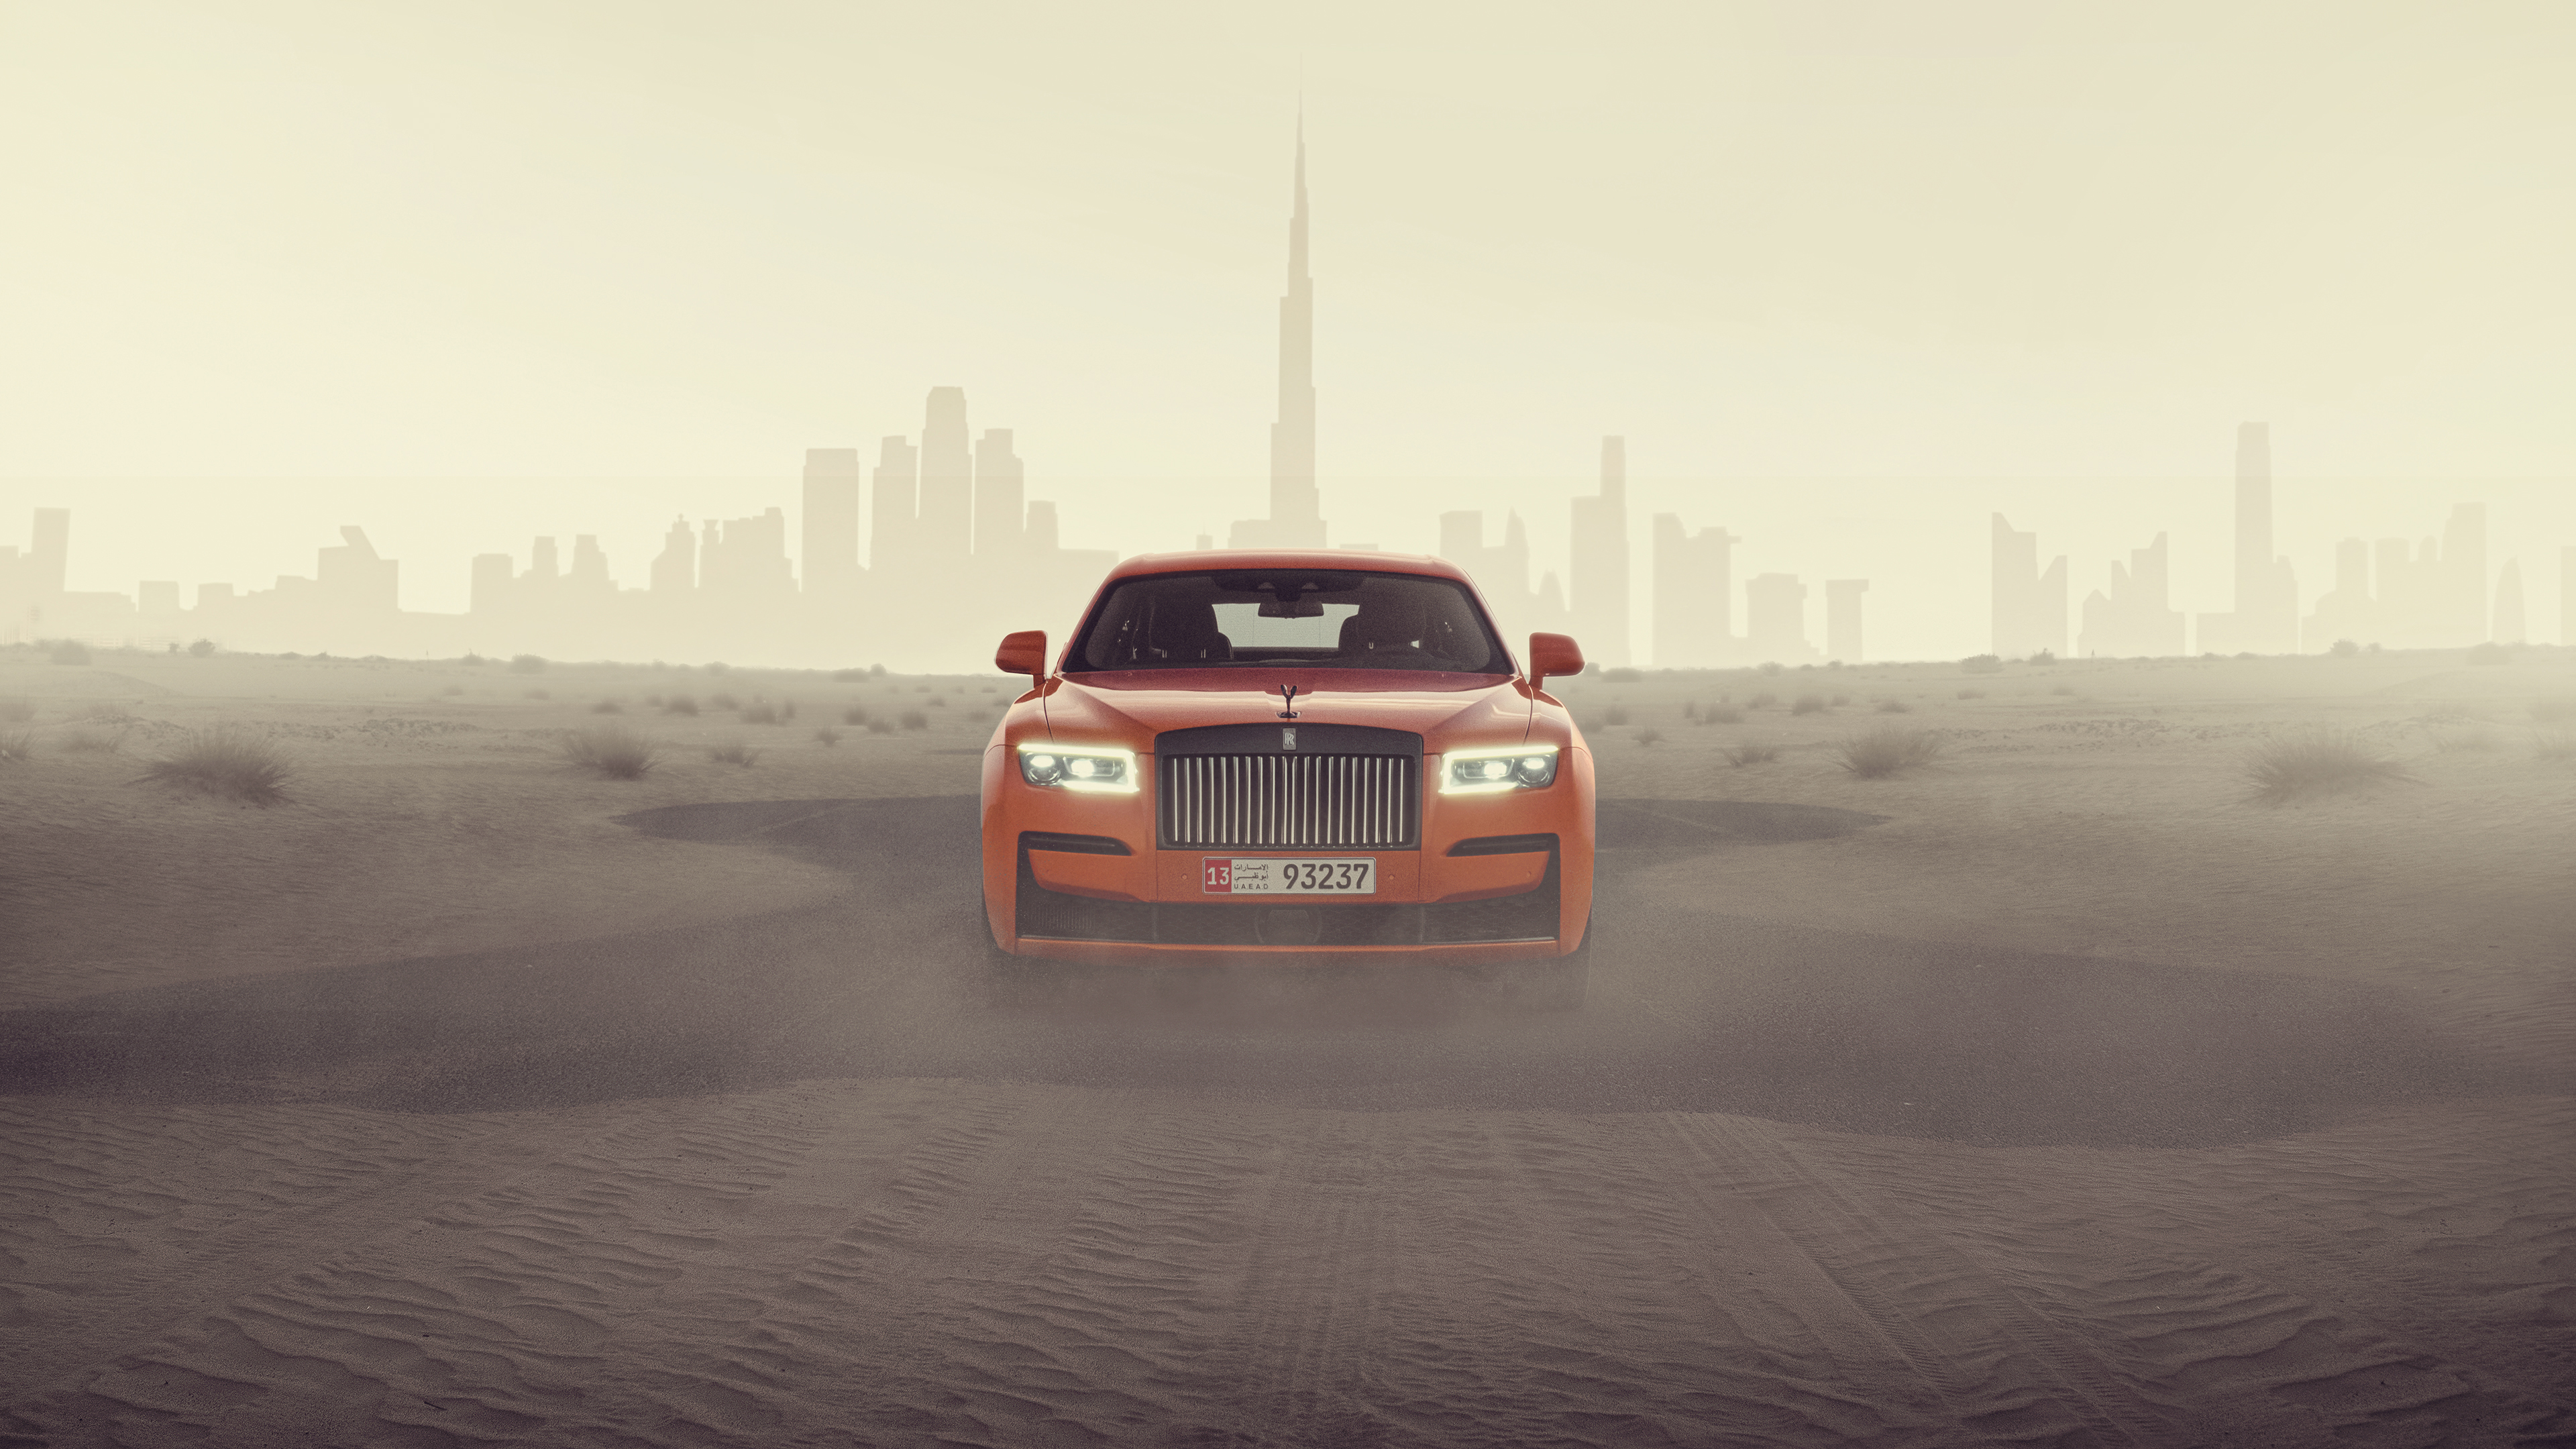 General 3840x2160 Rolls-Royce desert city sand car simple background silhouette minimalism frontal view headlights British cars luxury cars